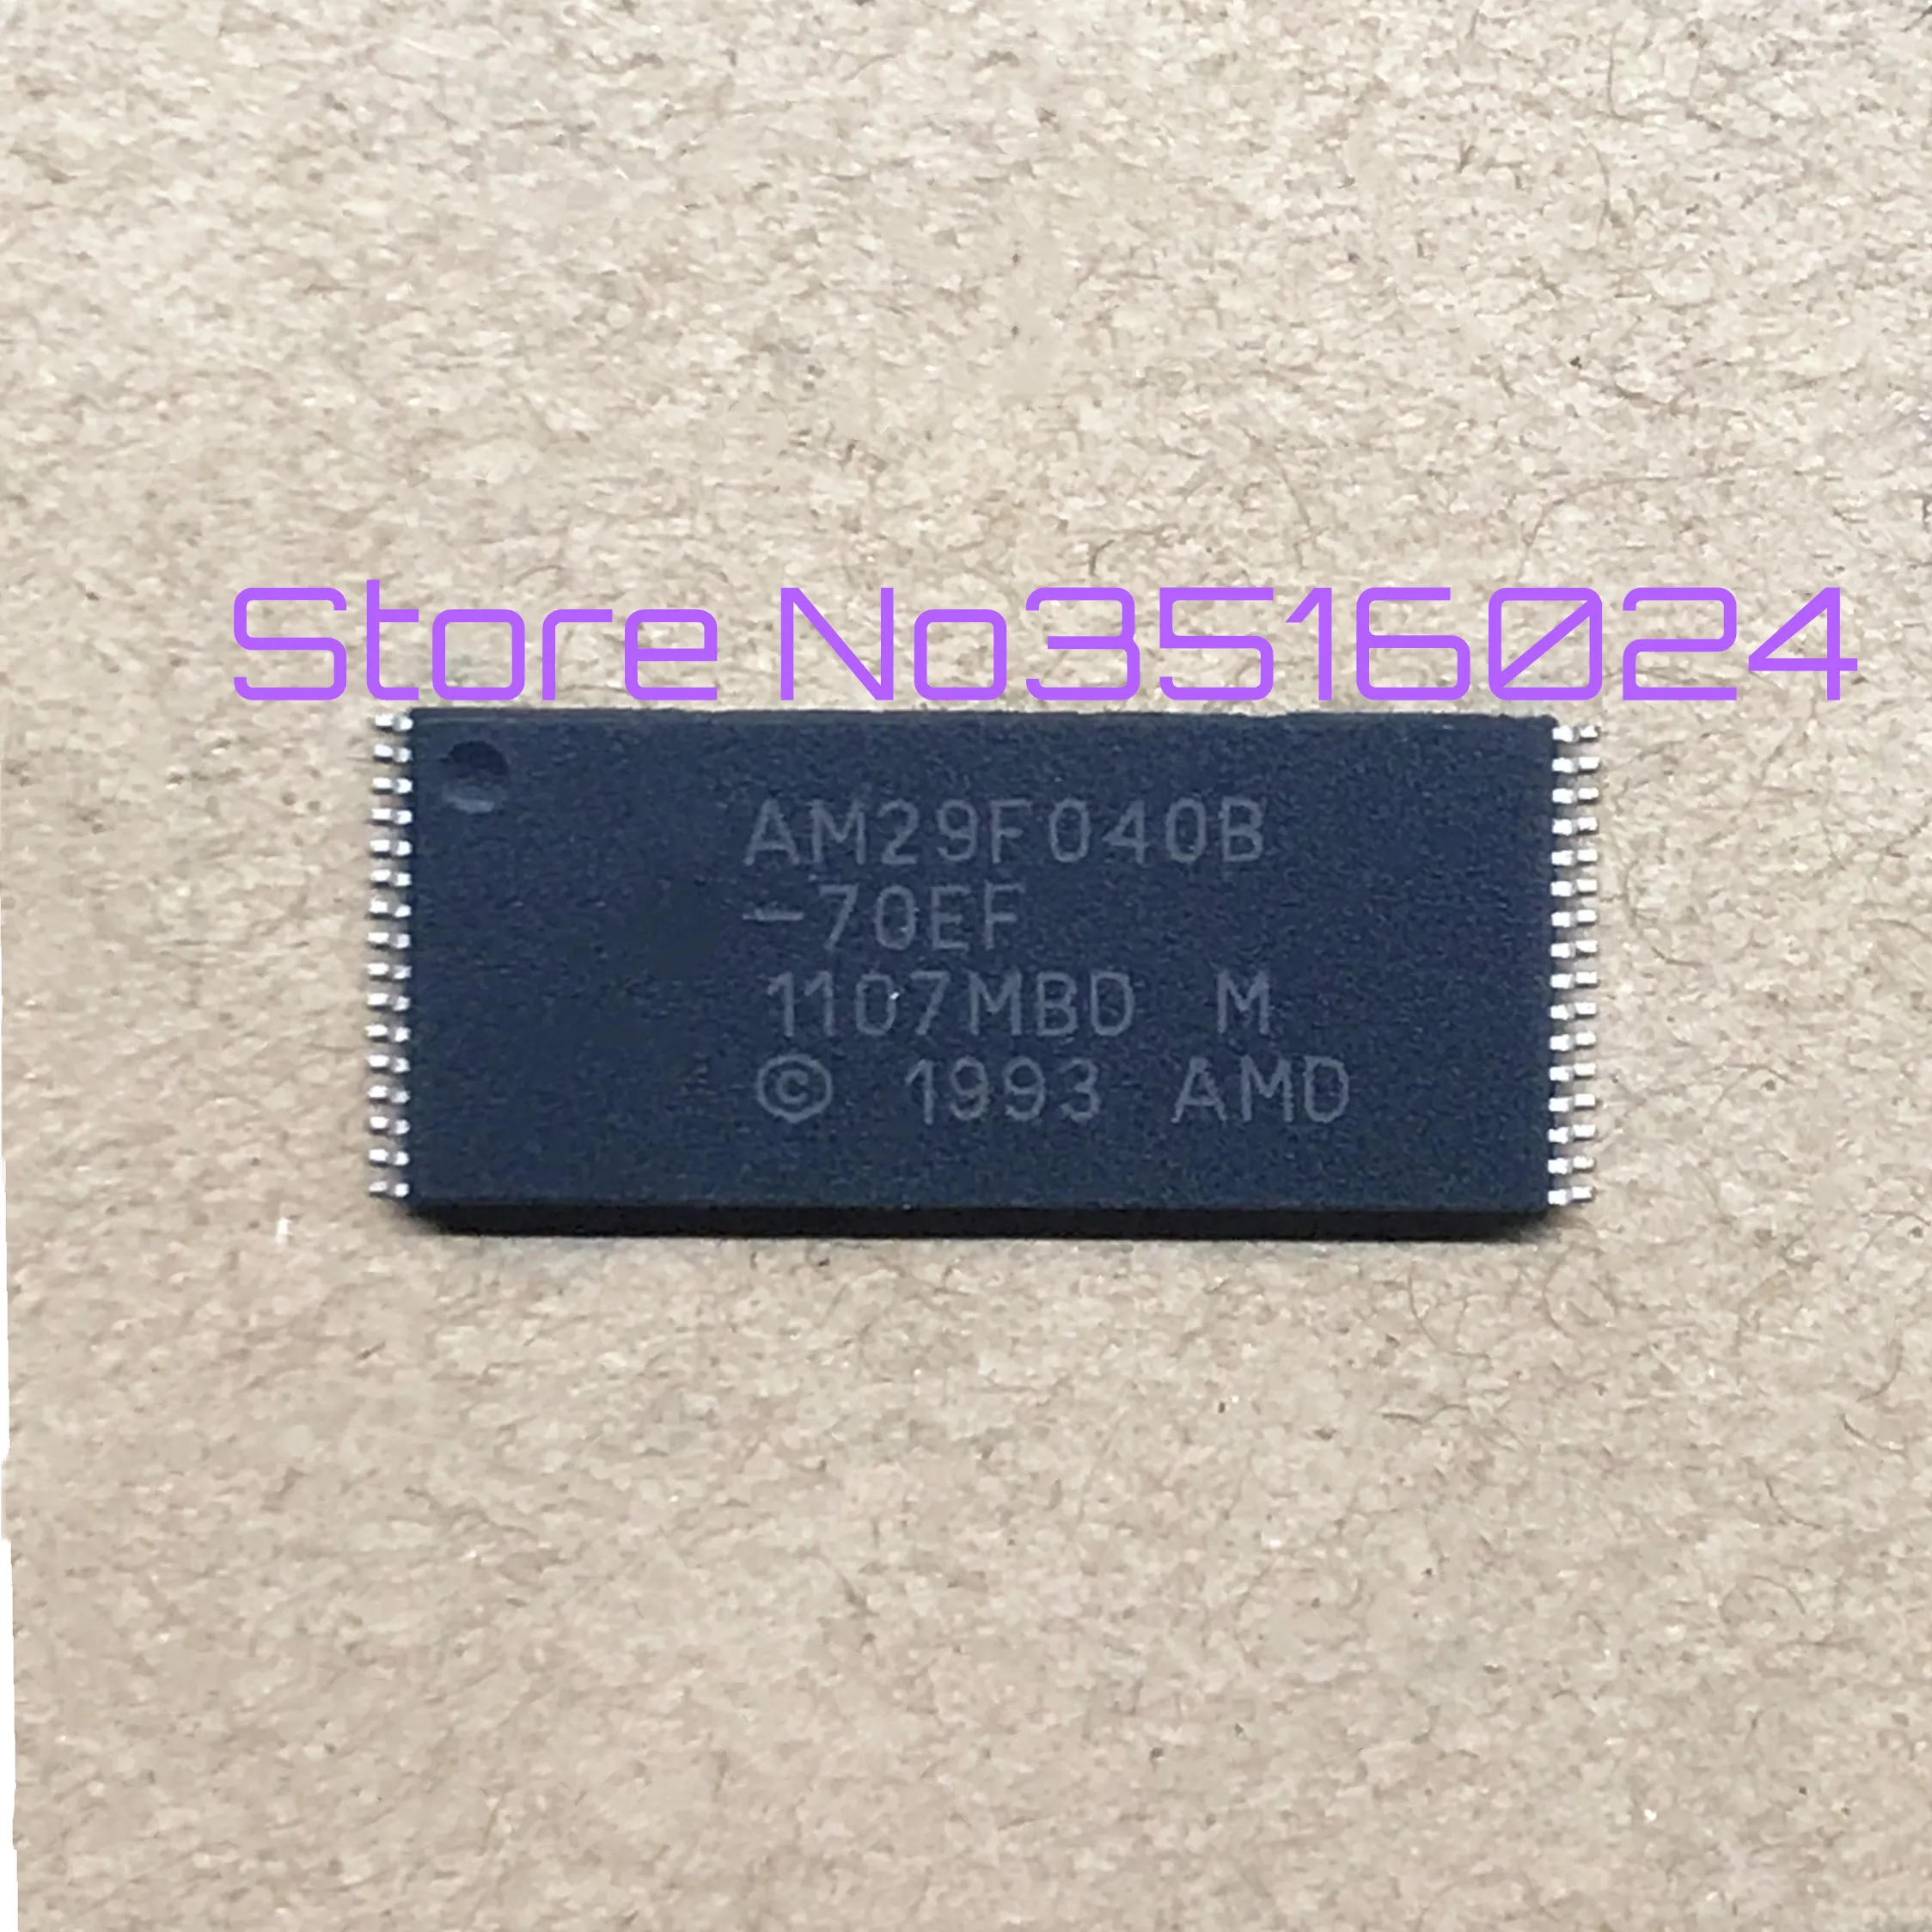 

NEW 5PCS 29F040B AM29F040B 29F040B-90EC AM29F040B-90 AM29F040B-90EC TSOP32 Fast delivery OriginalQuality assurance